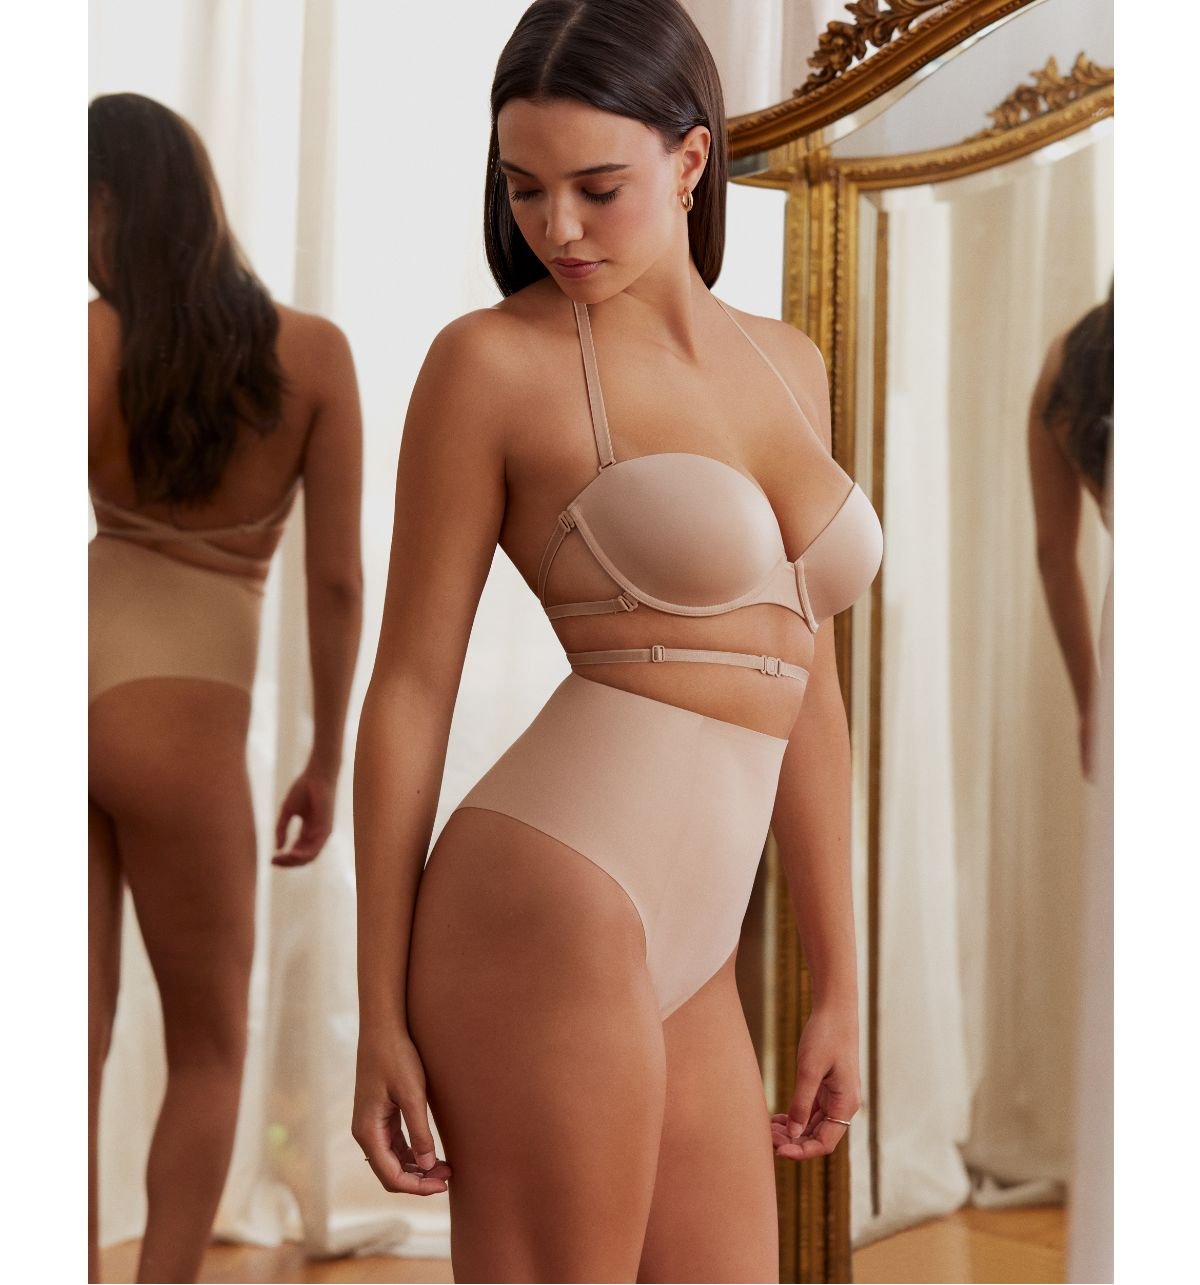 Intimissimi: Invisible underwear perfect for summer